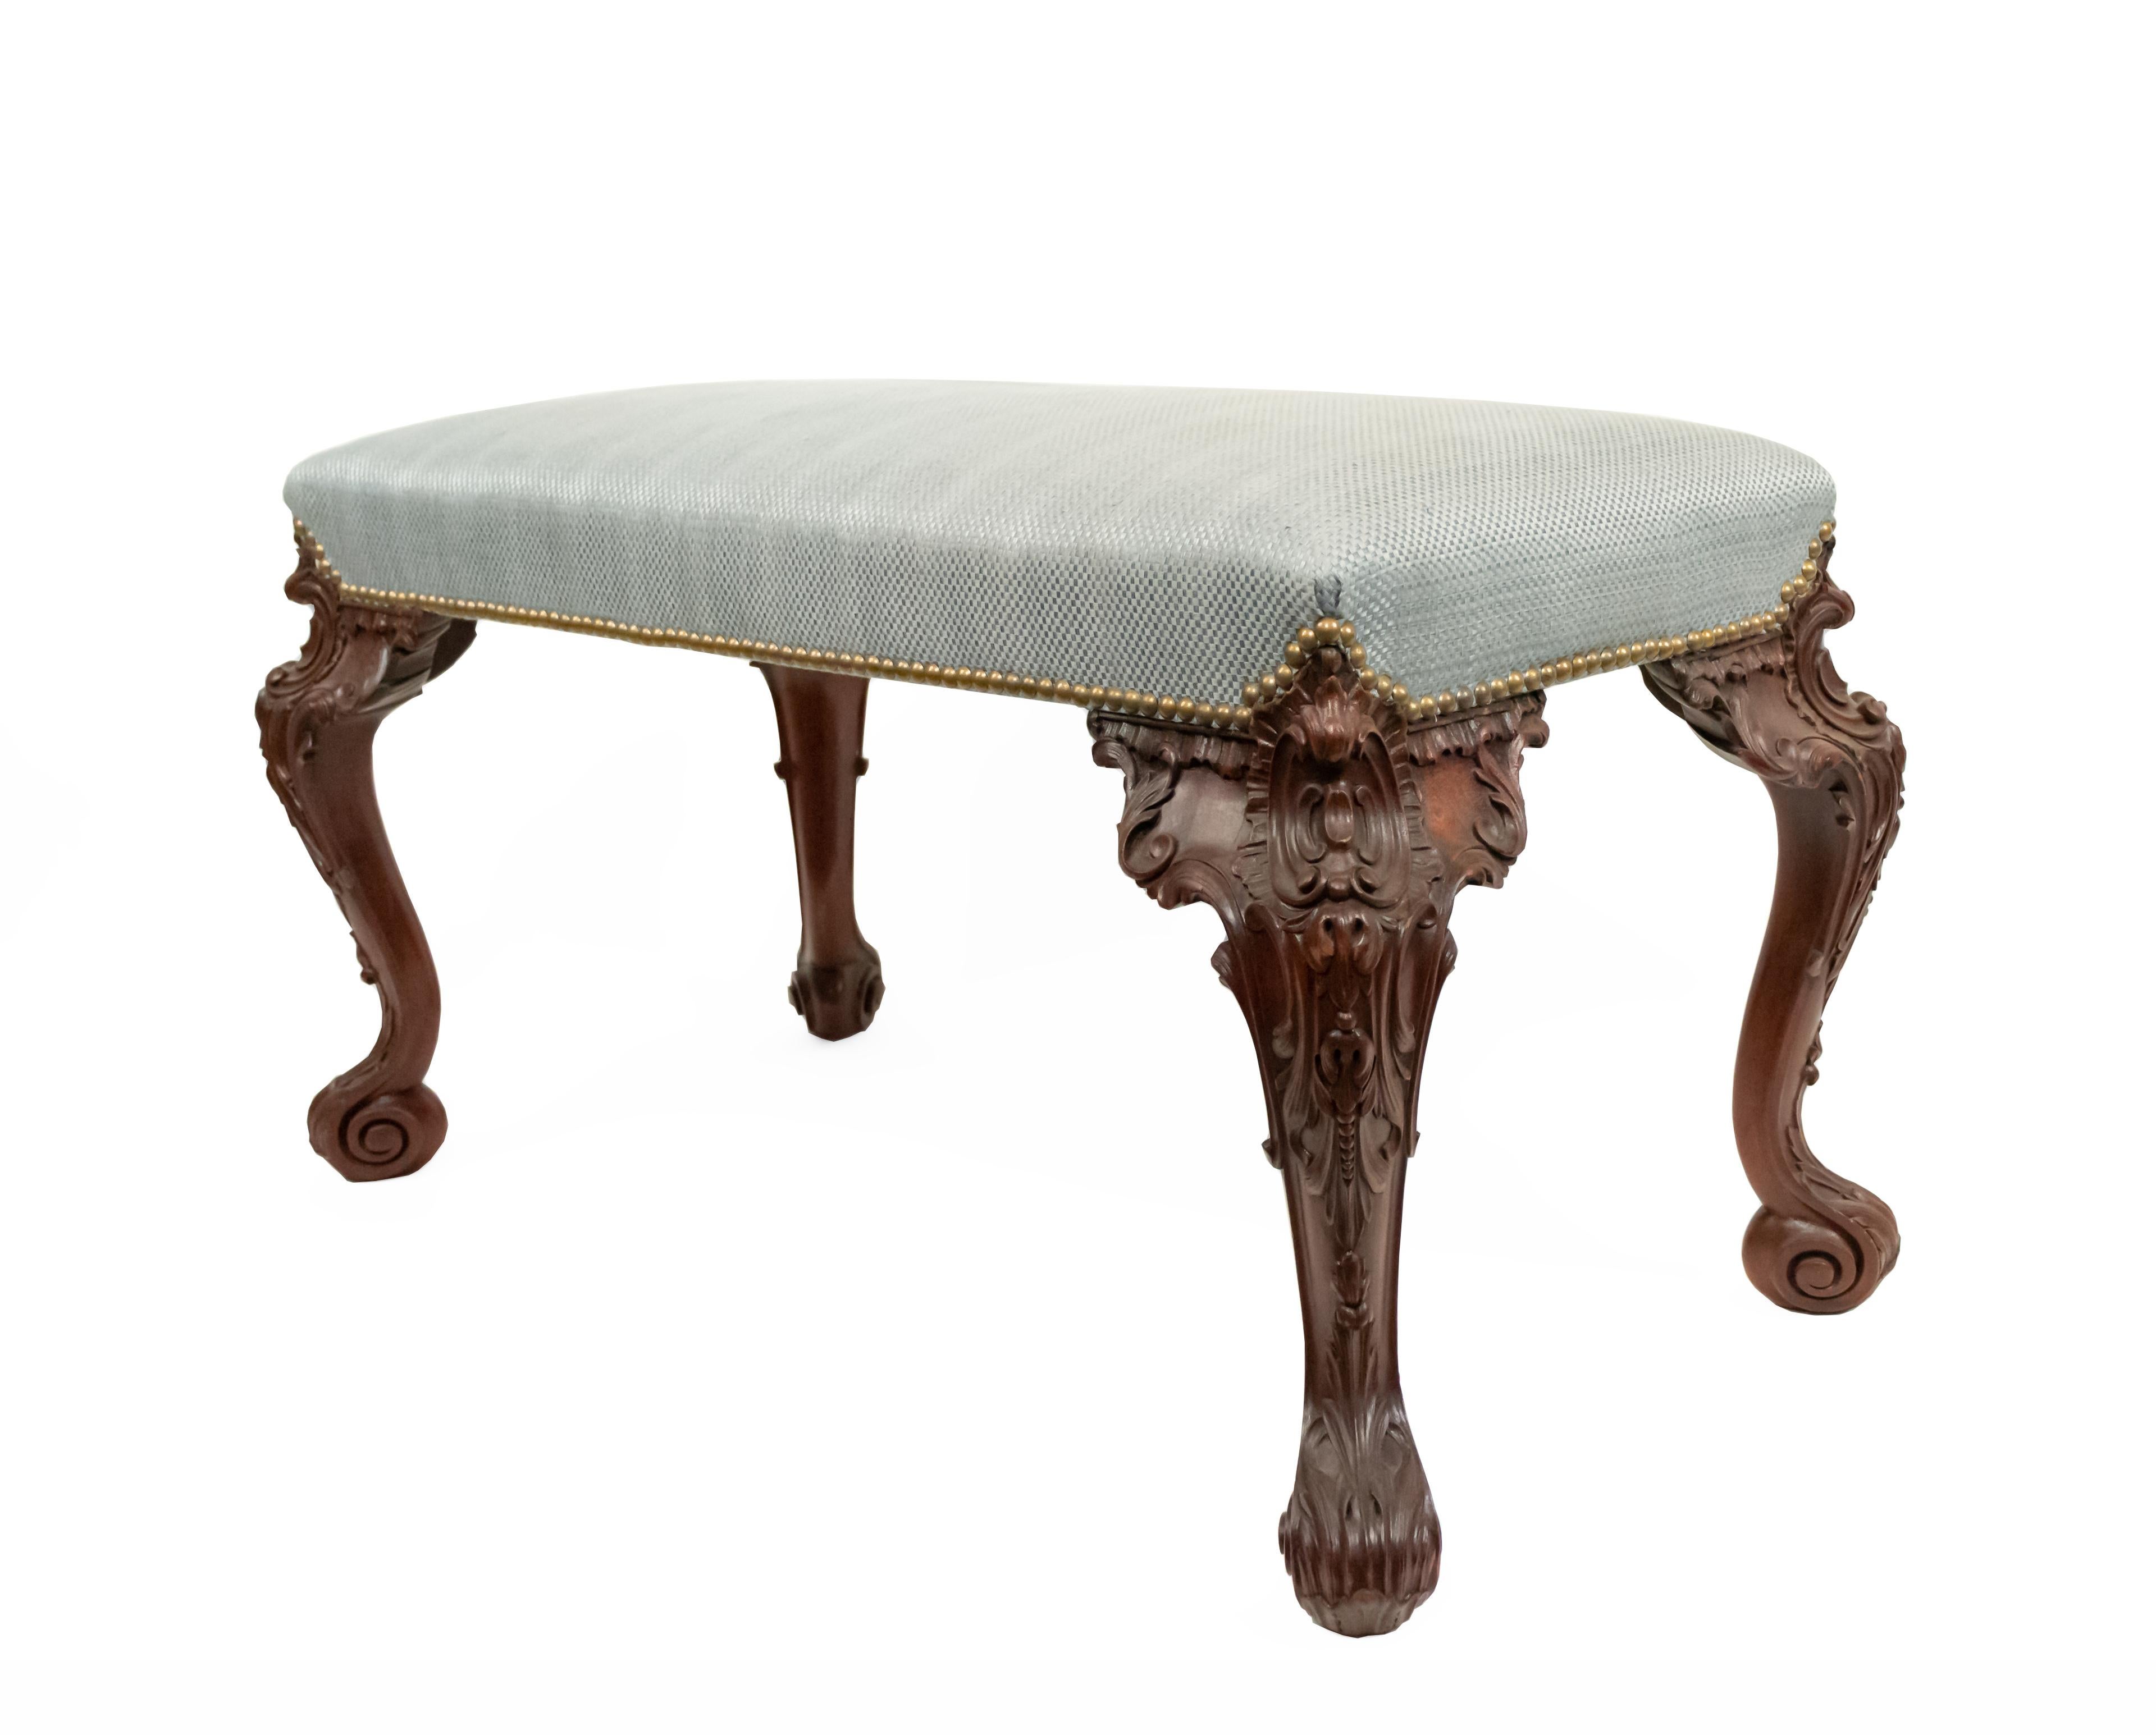 19th century English Chippendale style rectangular carved mahogany bench with blue upholstery.